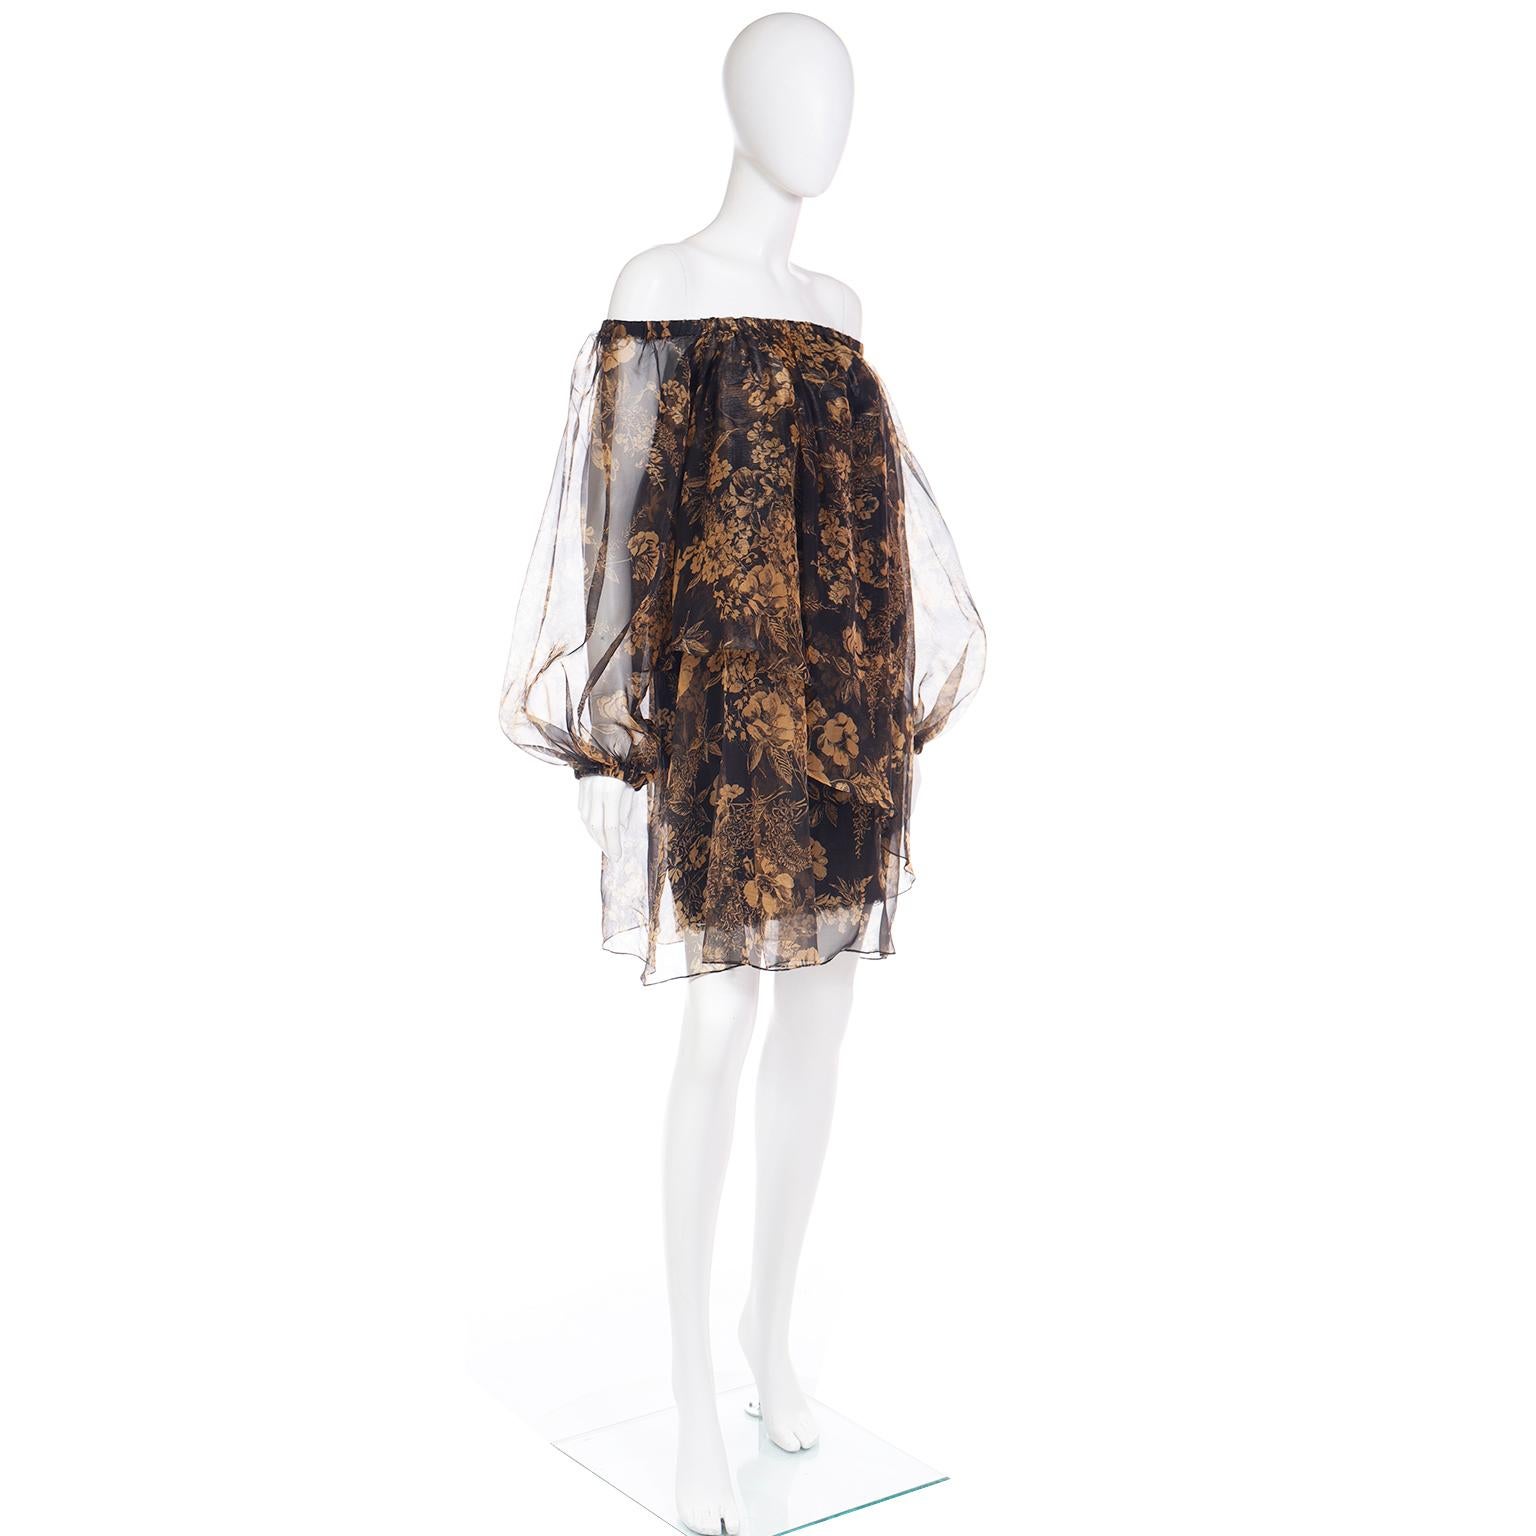 1990 Yves Saint Laurent Black and Gold Chiffon Dress With Sheer Balloon Sleeves For Sale 4